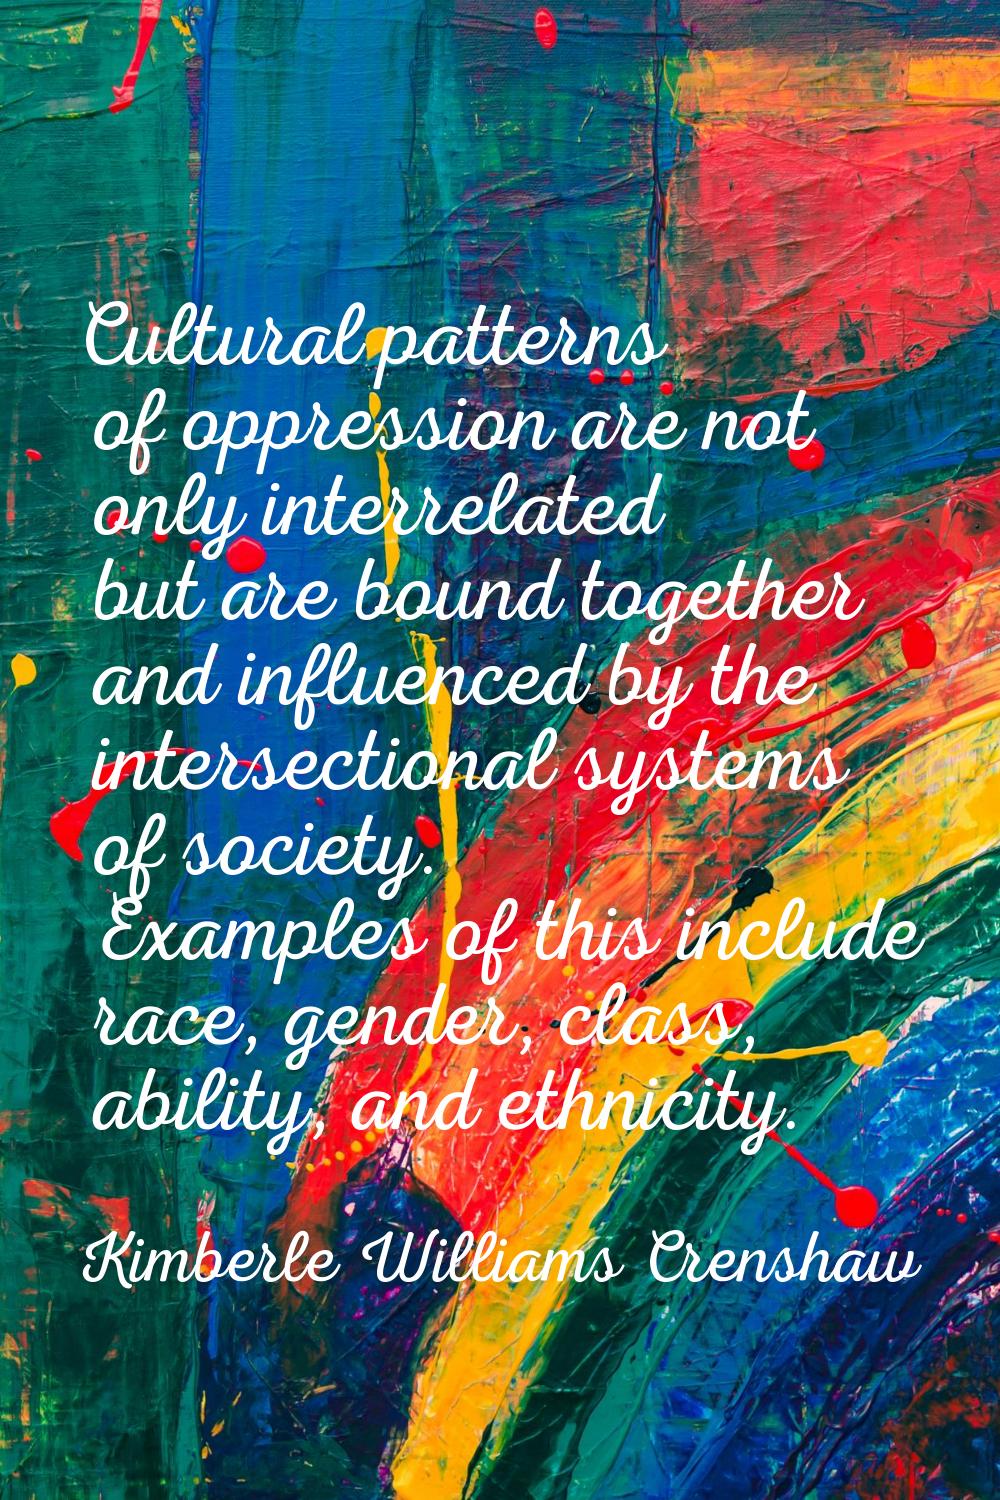 Cultural patterns of oppression are not only interrelated but are bound together and influenced by 